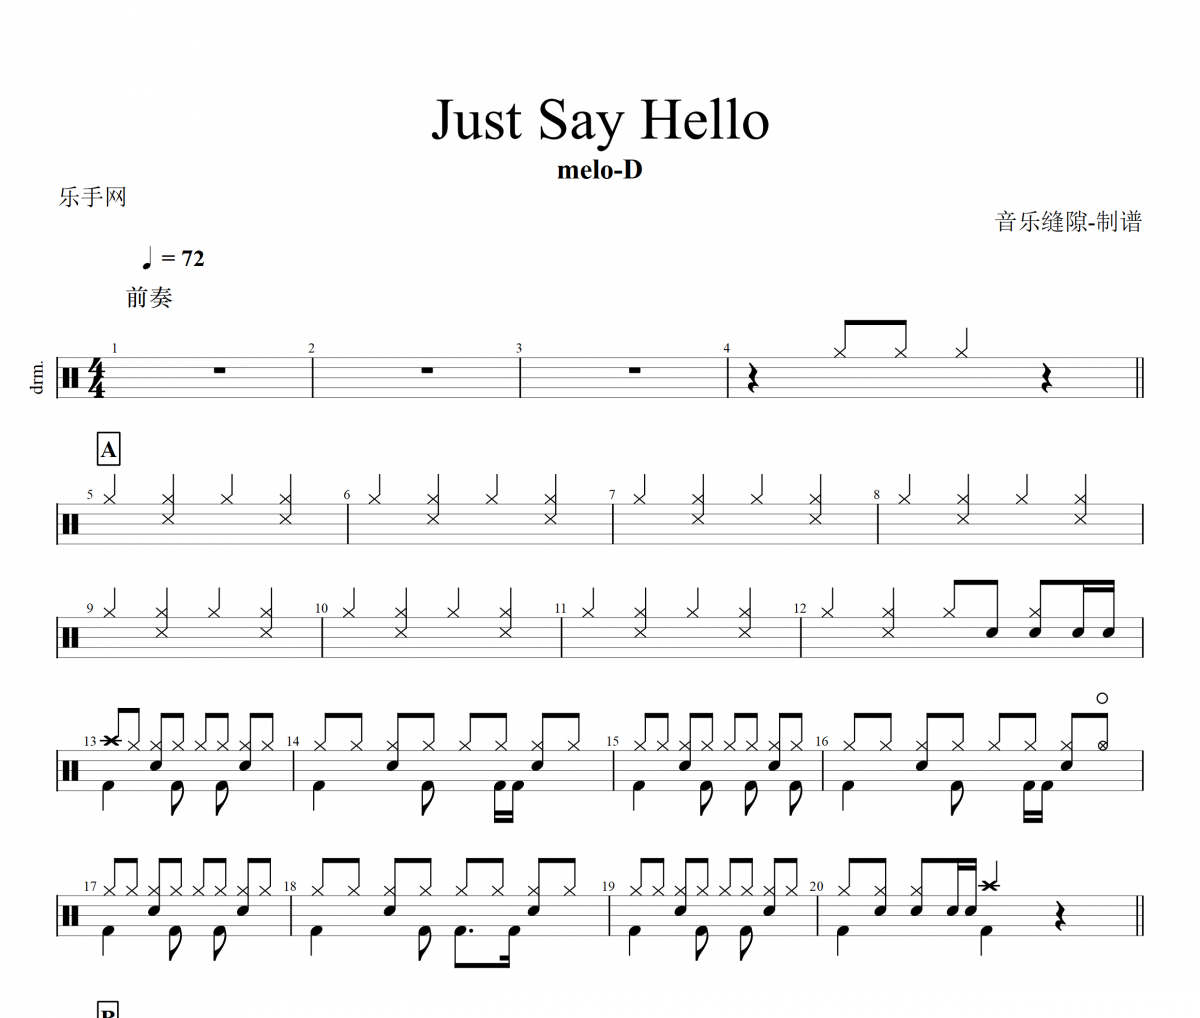 Just Say Hello鼓谱 melo-D《Just Say Hello》架子鼓|爵士鼓|鼓谱+动态视频